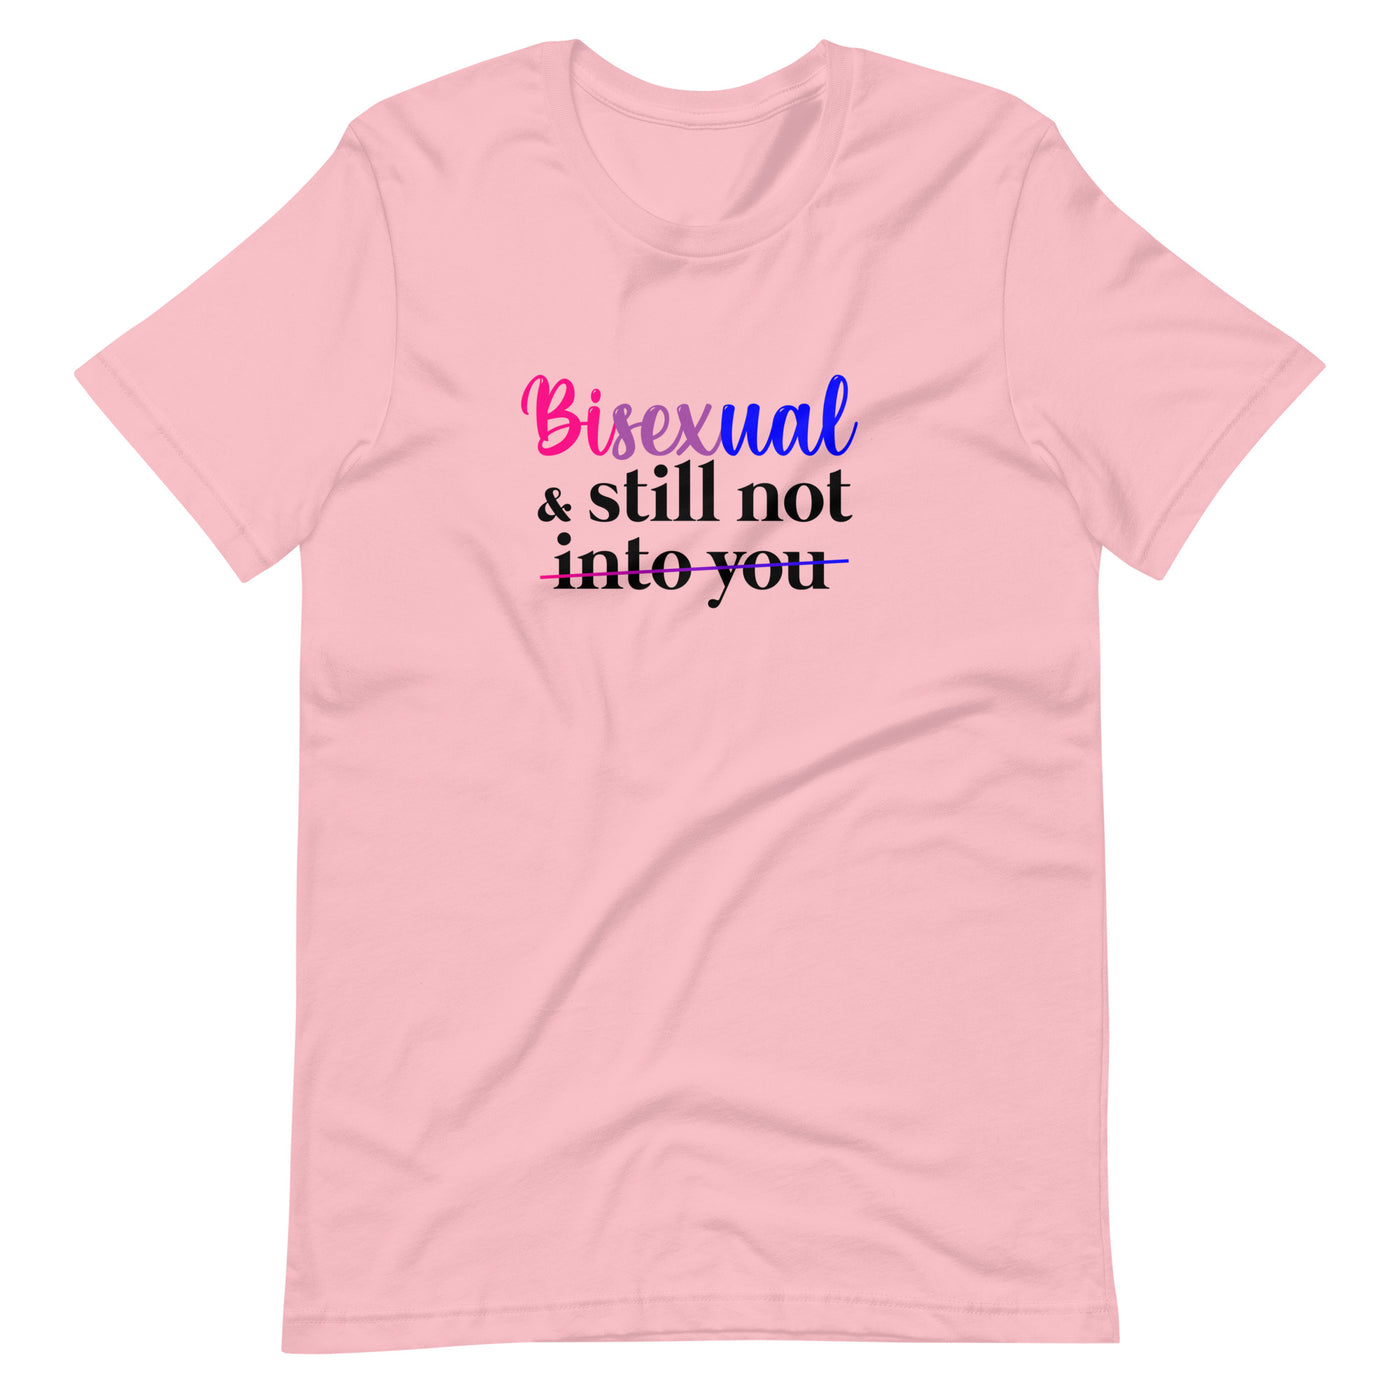 Pride Clothes - Not-So-Gentle Bisexual & Still Not into You TShirt - Pink